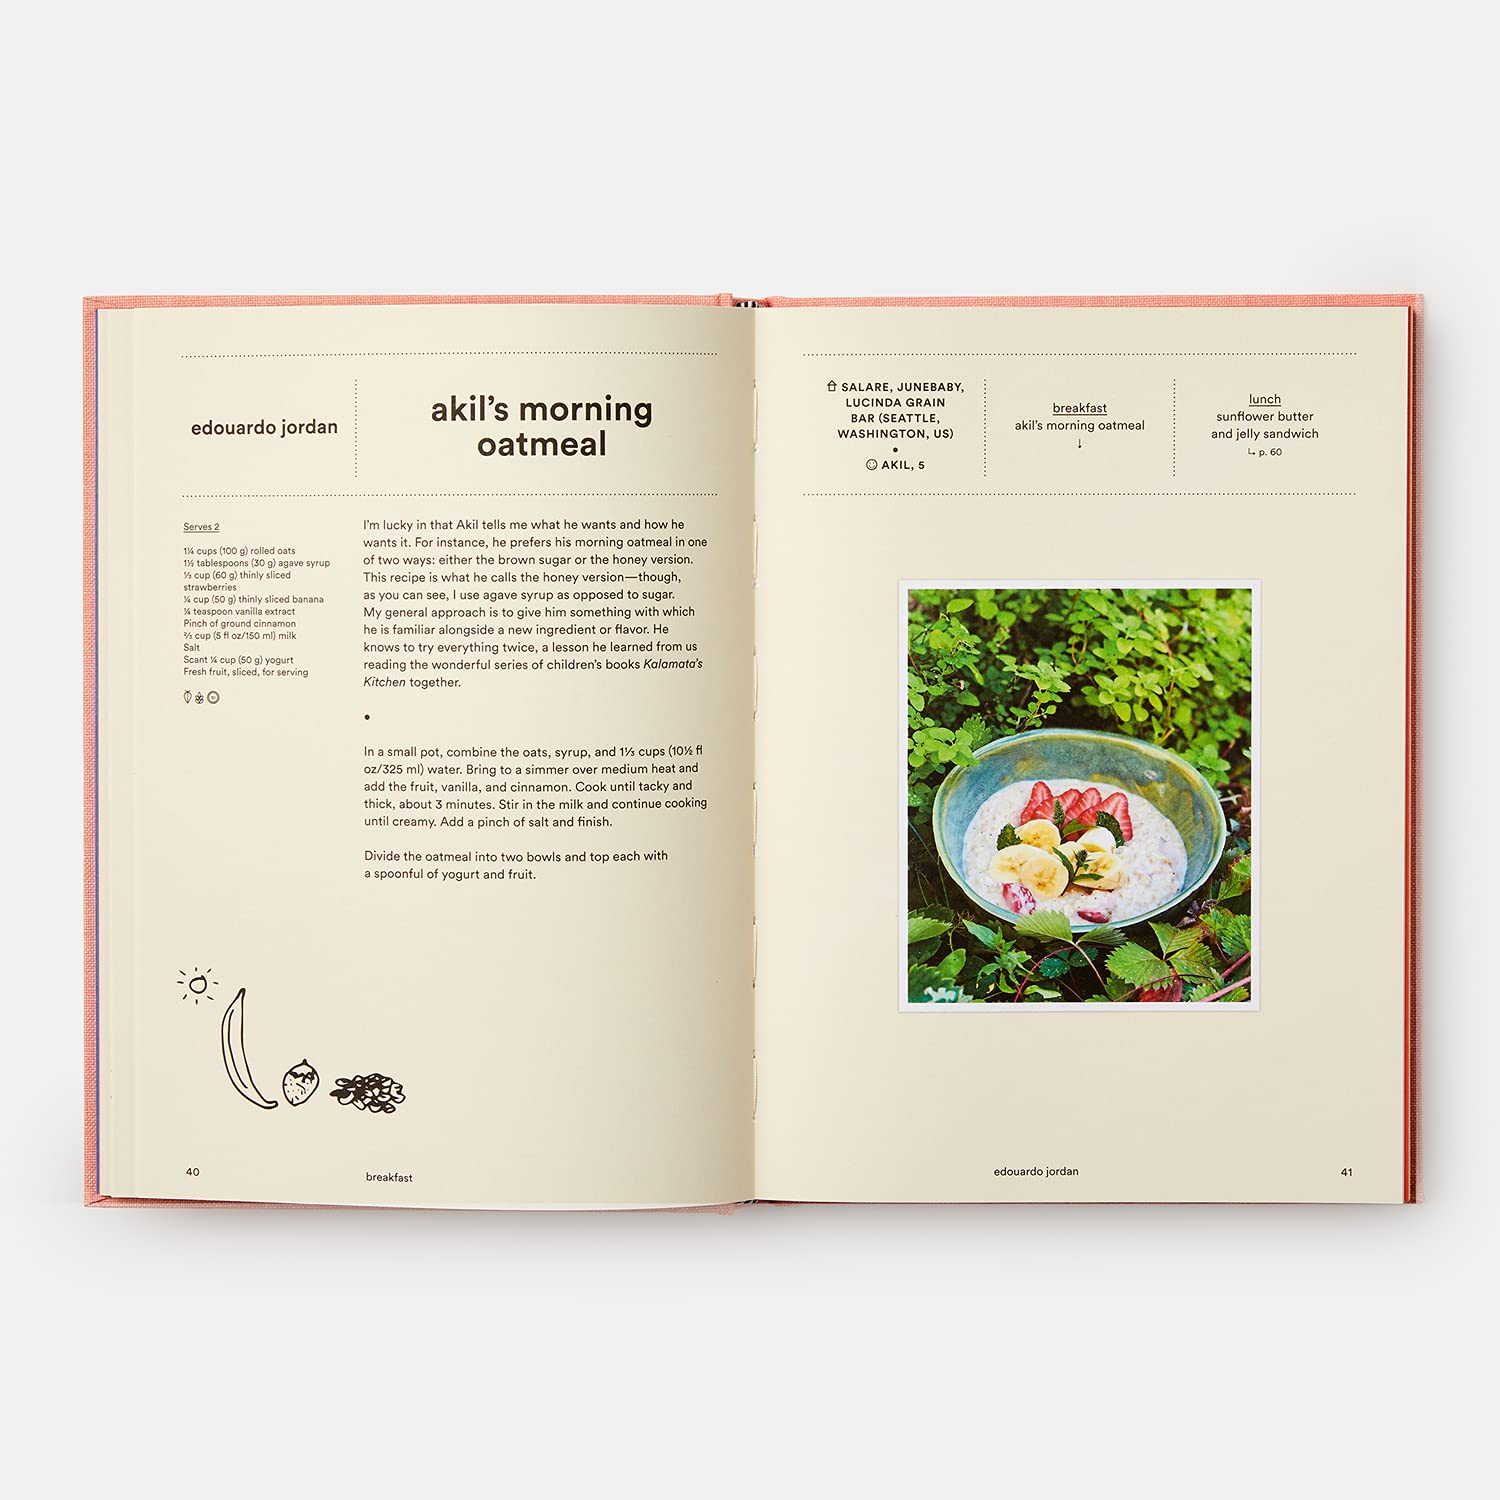 Cooking for your kids - at home with the worlds greatest chefs